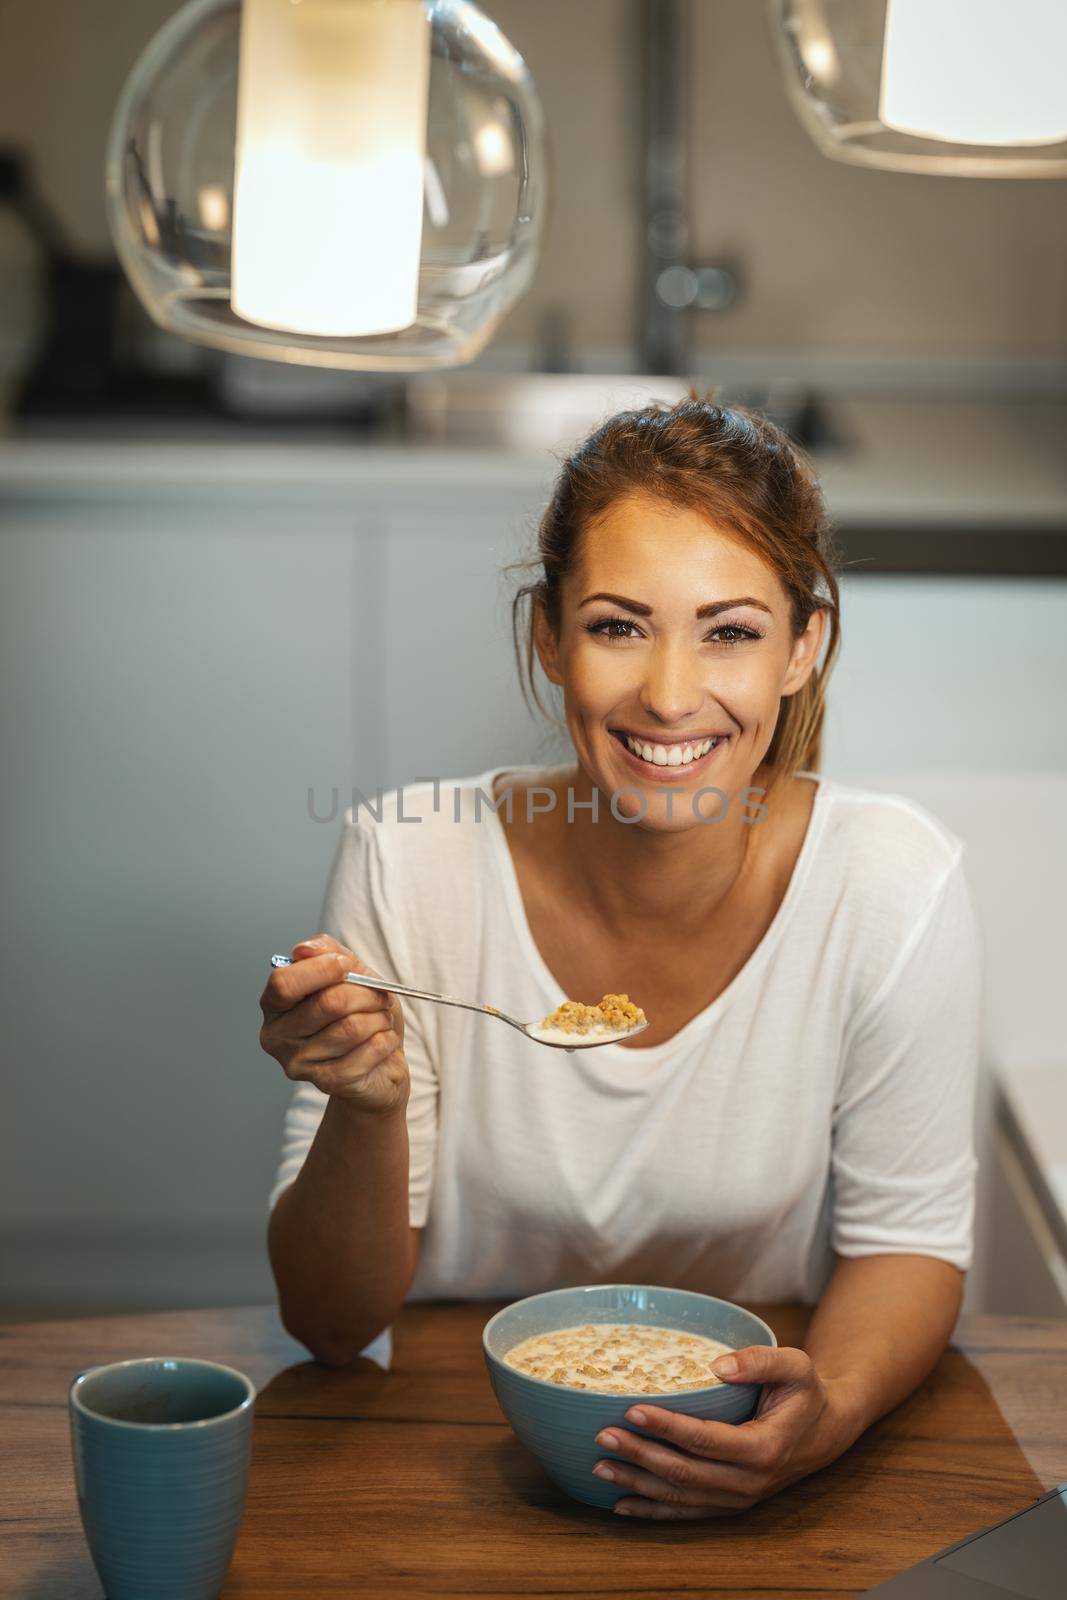 Beautiful young smiling woman is eating healthy breakfast in her kitchen. Looking at camera.